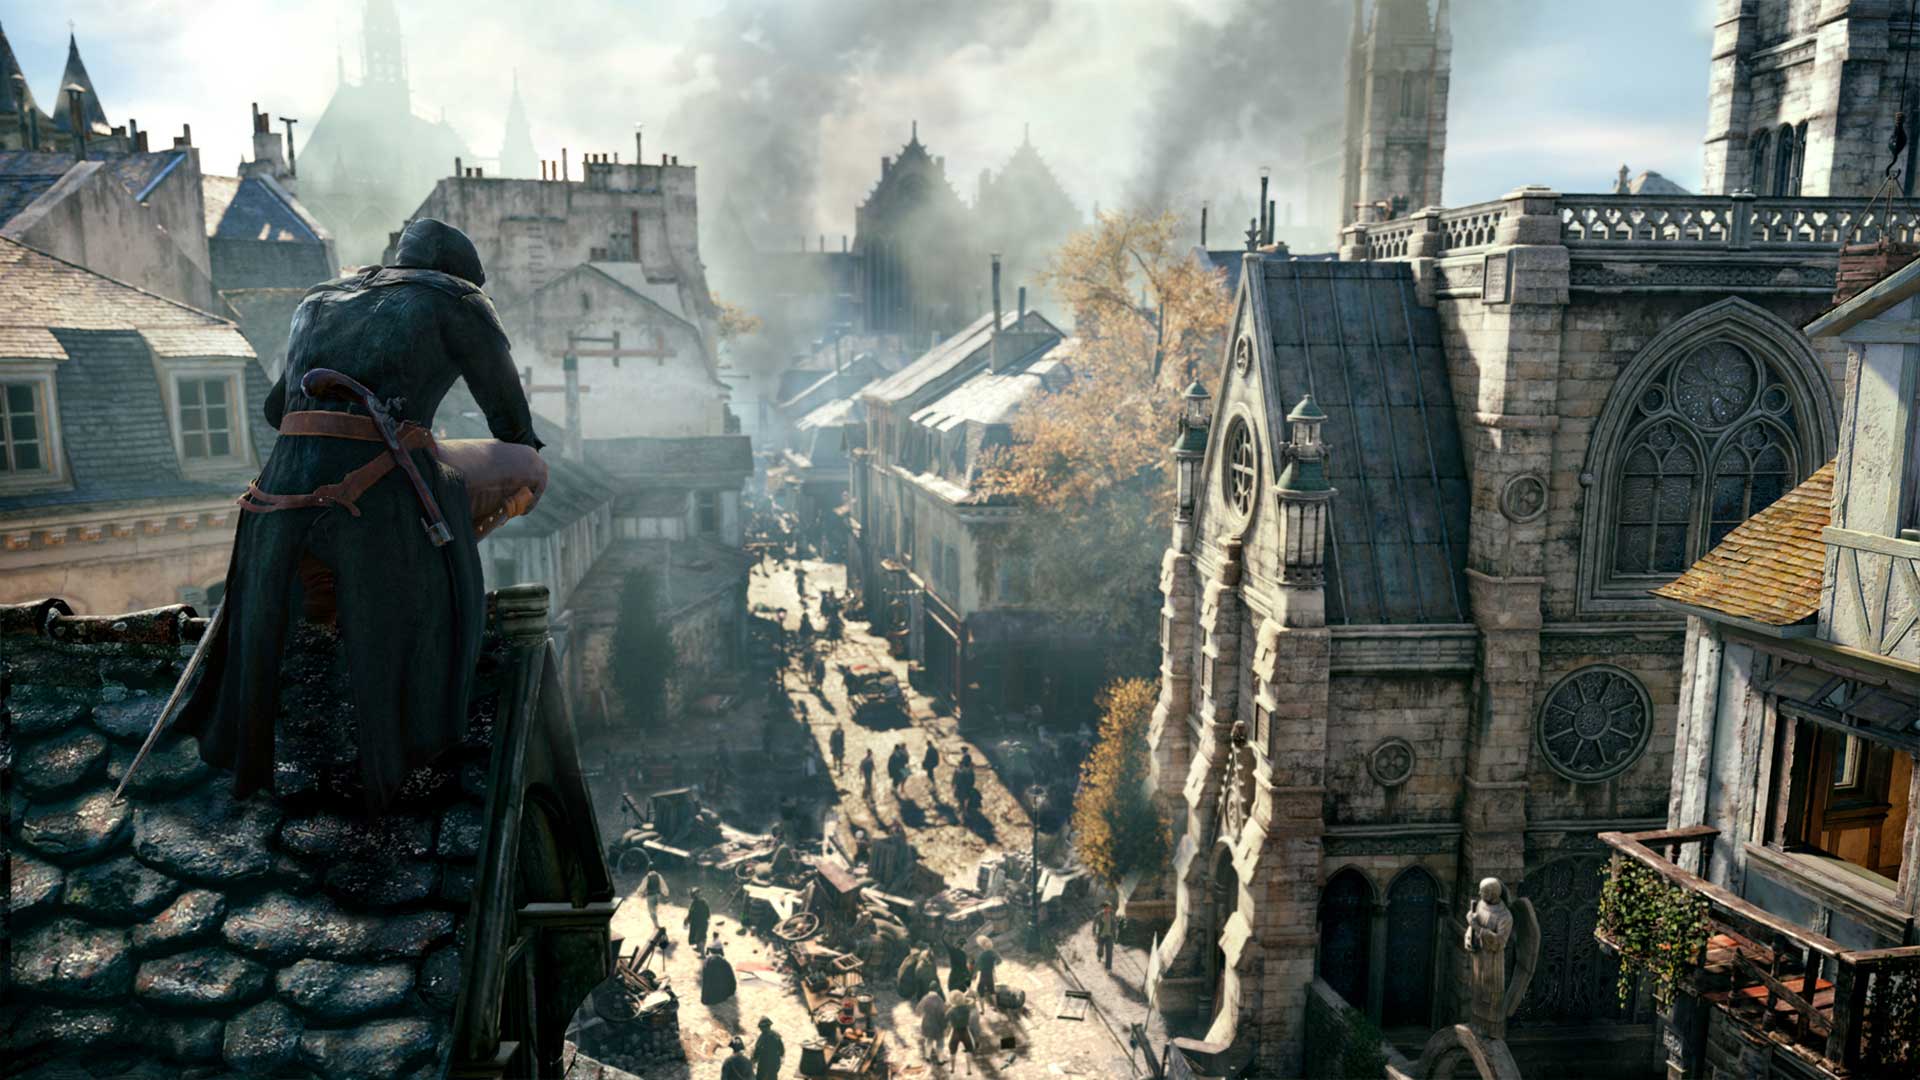 Assassin-s-Creed-Unity-Gets-More-Details-from-Comic-Con-2014-452208-2